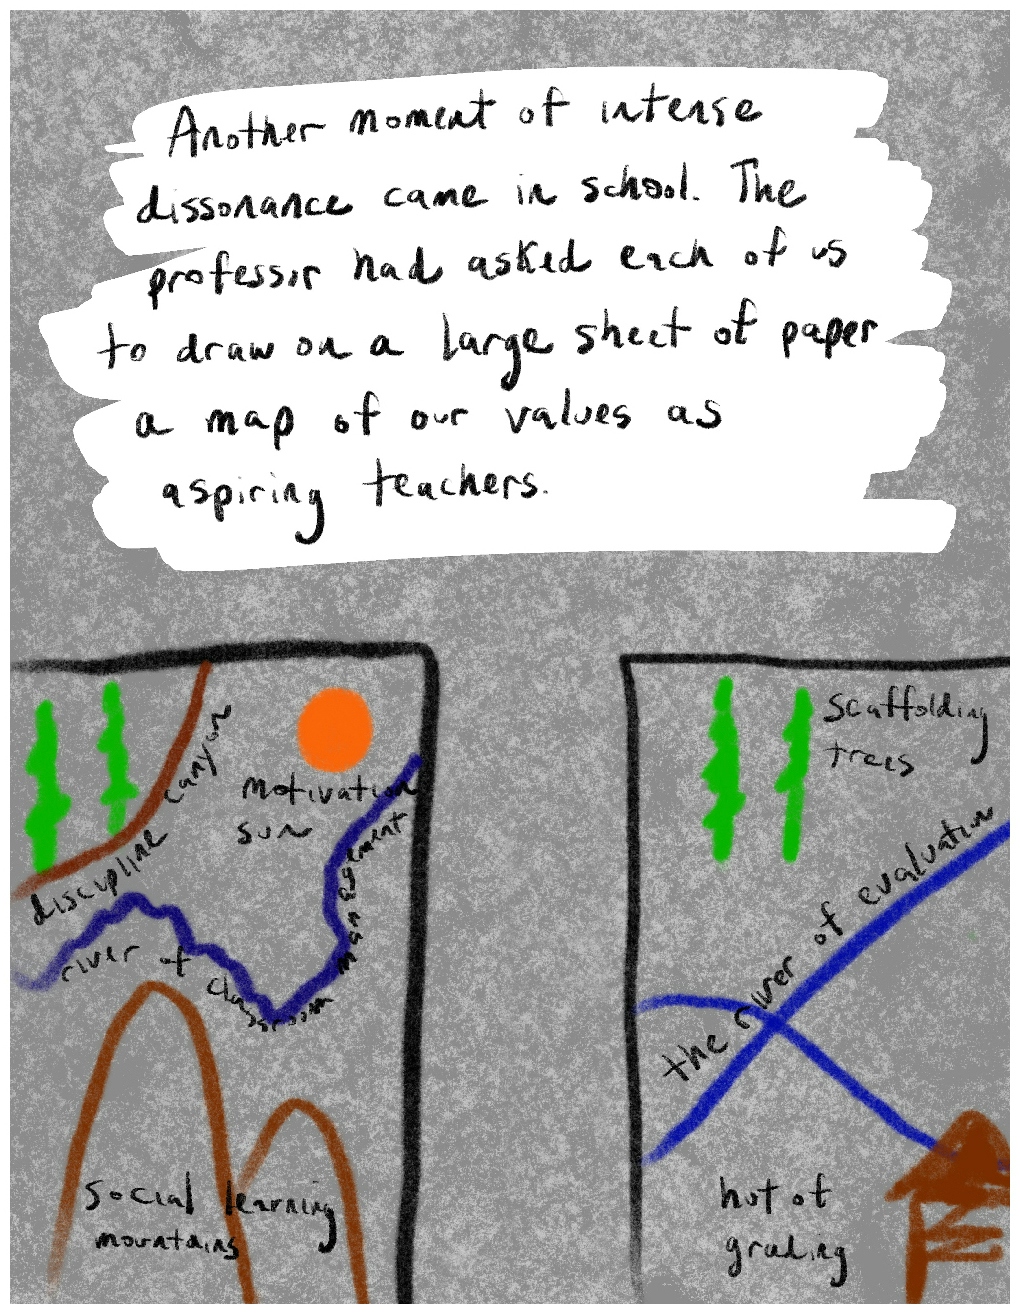 Panel 1 of a four-panel comic called "Disembodied and alone'', consisting of thick line drawings on a mottled grey background. Two crudely drawn rectangular maps sit in either corner of the bottom half of hte panel, containing coloured lines representing rivers, trees and terrain. The features are labelled with words, including 'scaffolding trees', 'the river of evaluation', 'discipline canyon' and 'social learning mountains'. A block of hand-written text against a white background at the top the panel says "Another moment of intense dissonance came in school. The professor had asked each of us to draw on a large sheet of paper a map of our values as aspiring teachers."